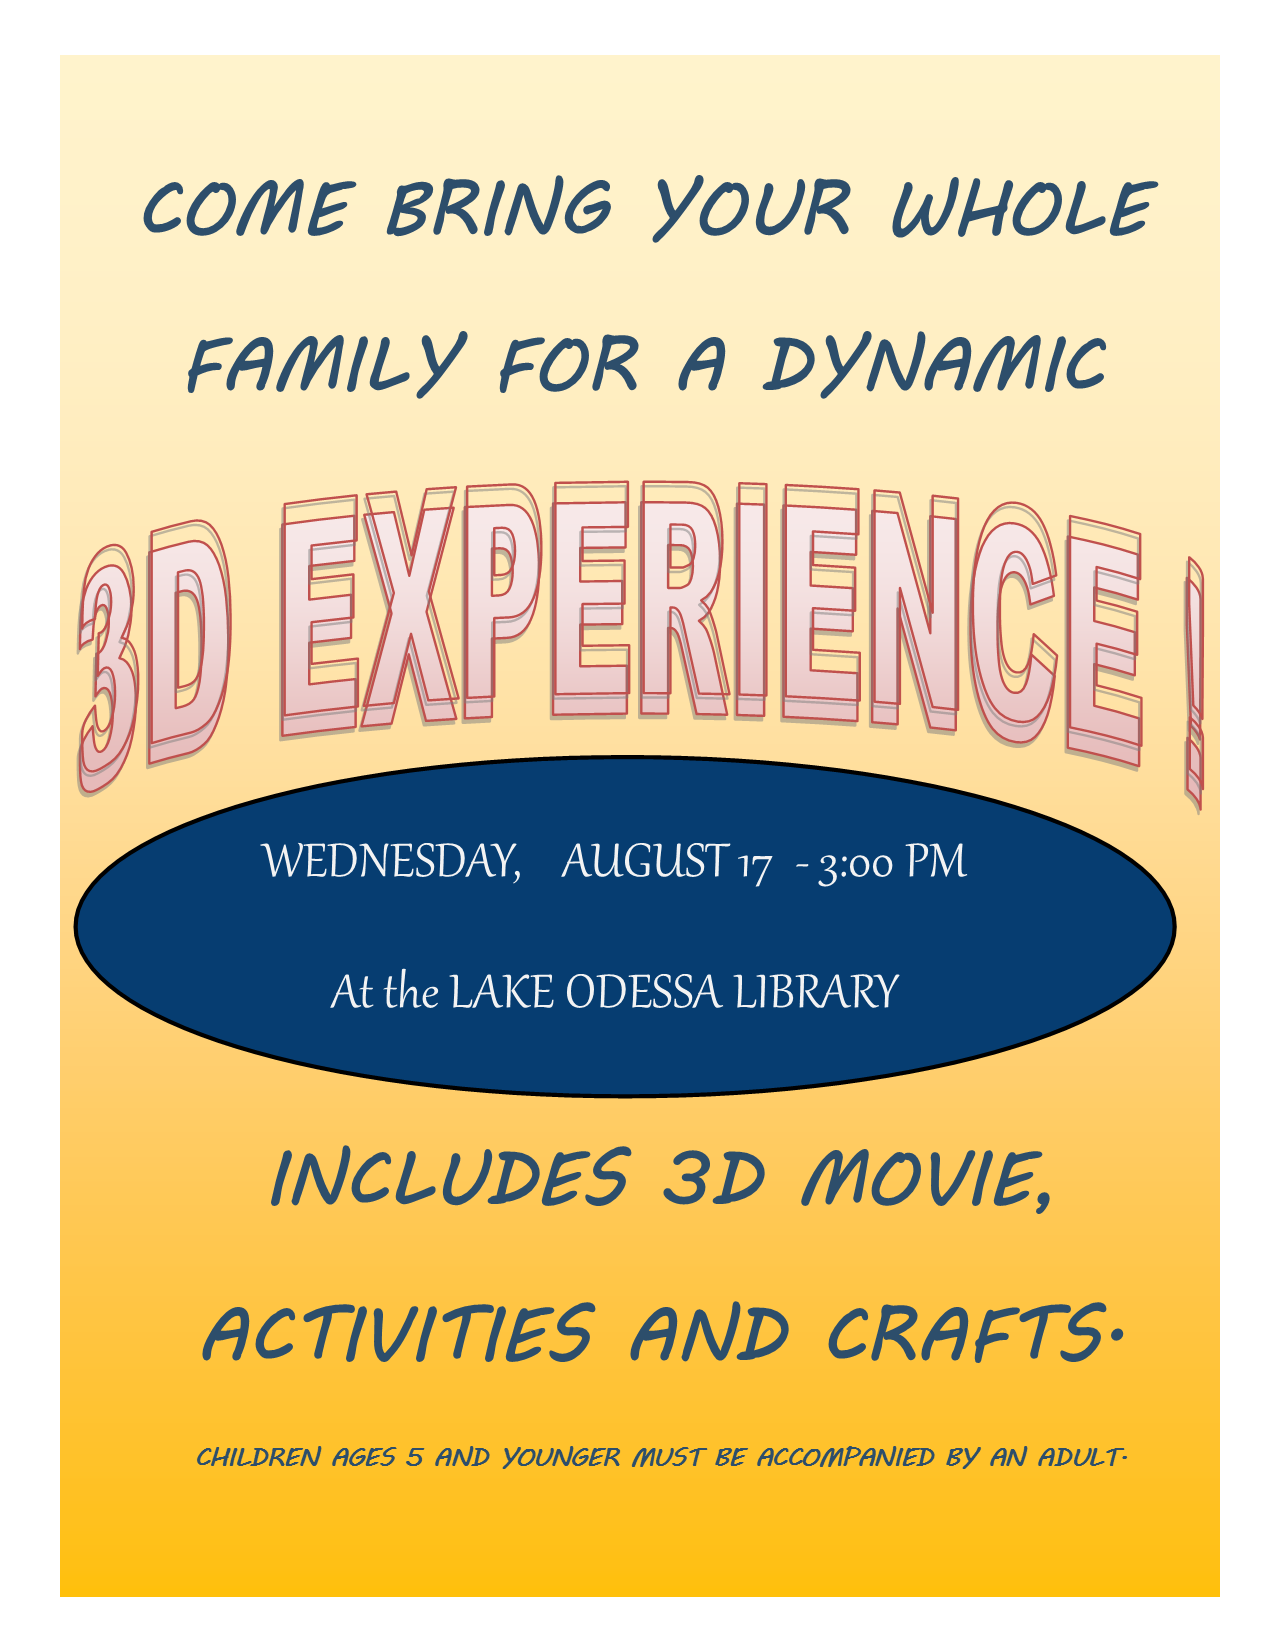 3D EXPERIENCE FLYER.png